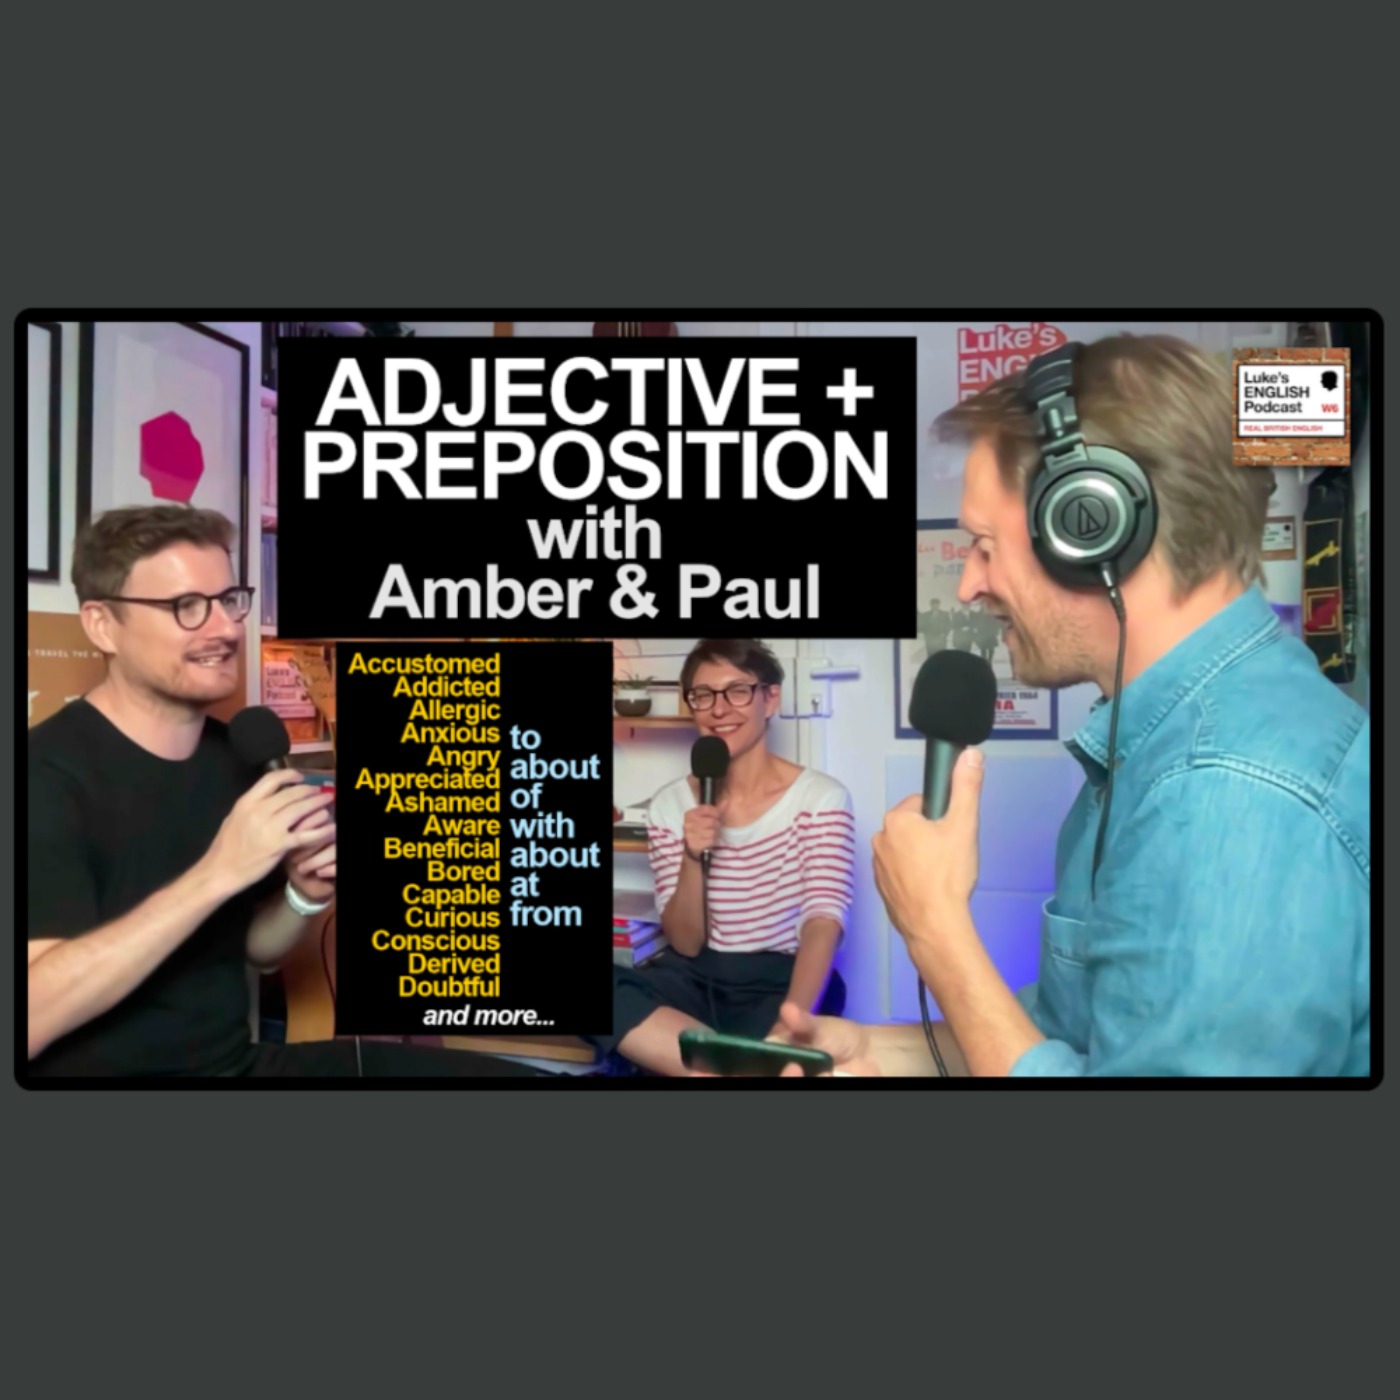 791. ADJECTIVE + PREPOSITION with Amber & Paul (A+P with A&P on LEP)